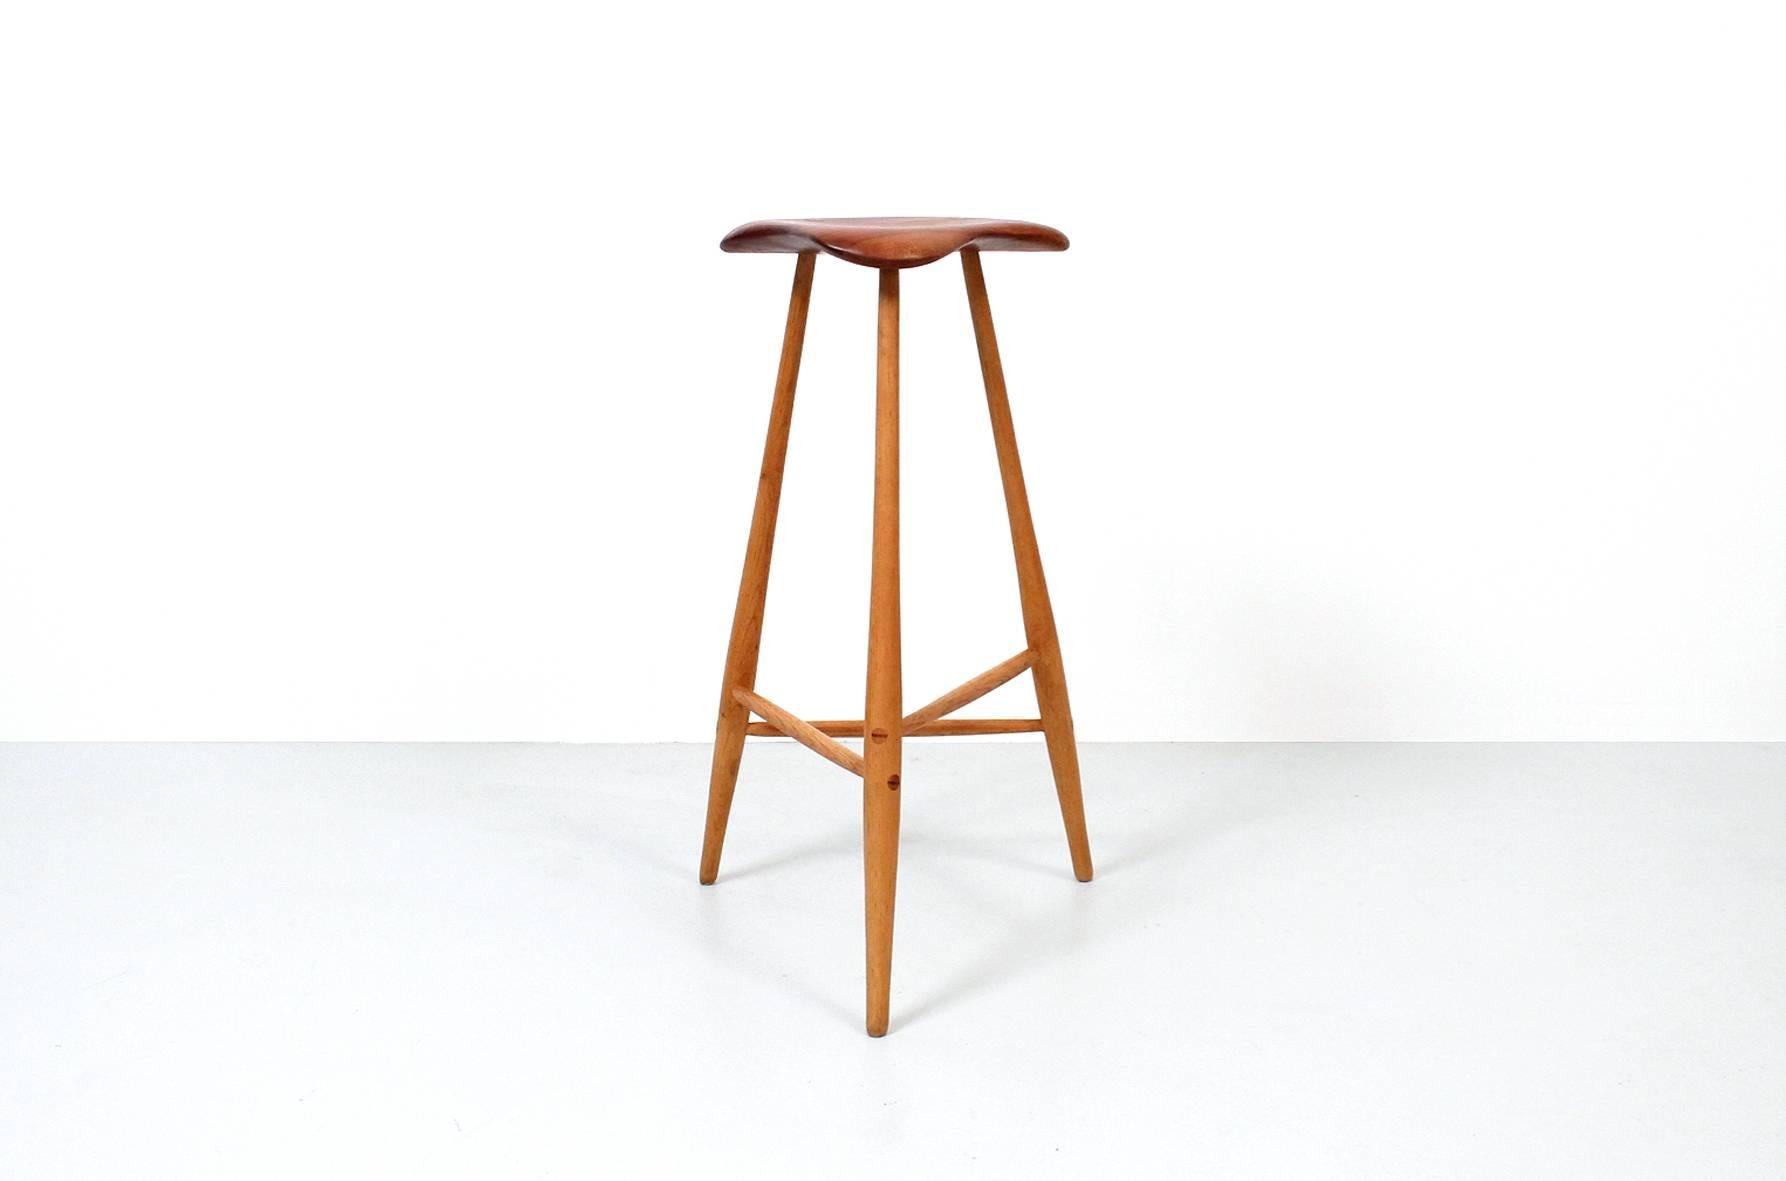 Studio furniture barstool by Horace B. Hartshaw. Hartshaw was Wharton Esherick's studio assistant. This stool is identical to those made by Esherick. Signed and dated. Cherry seat and hickory legs.